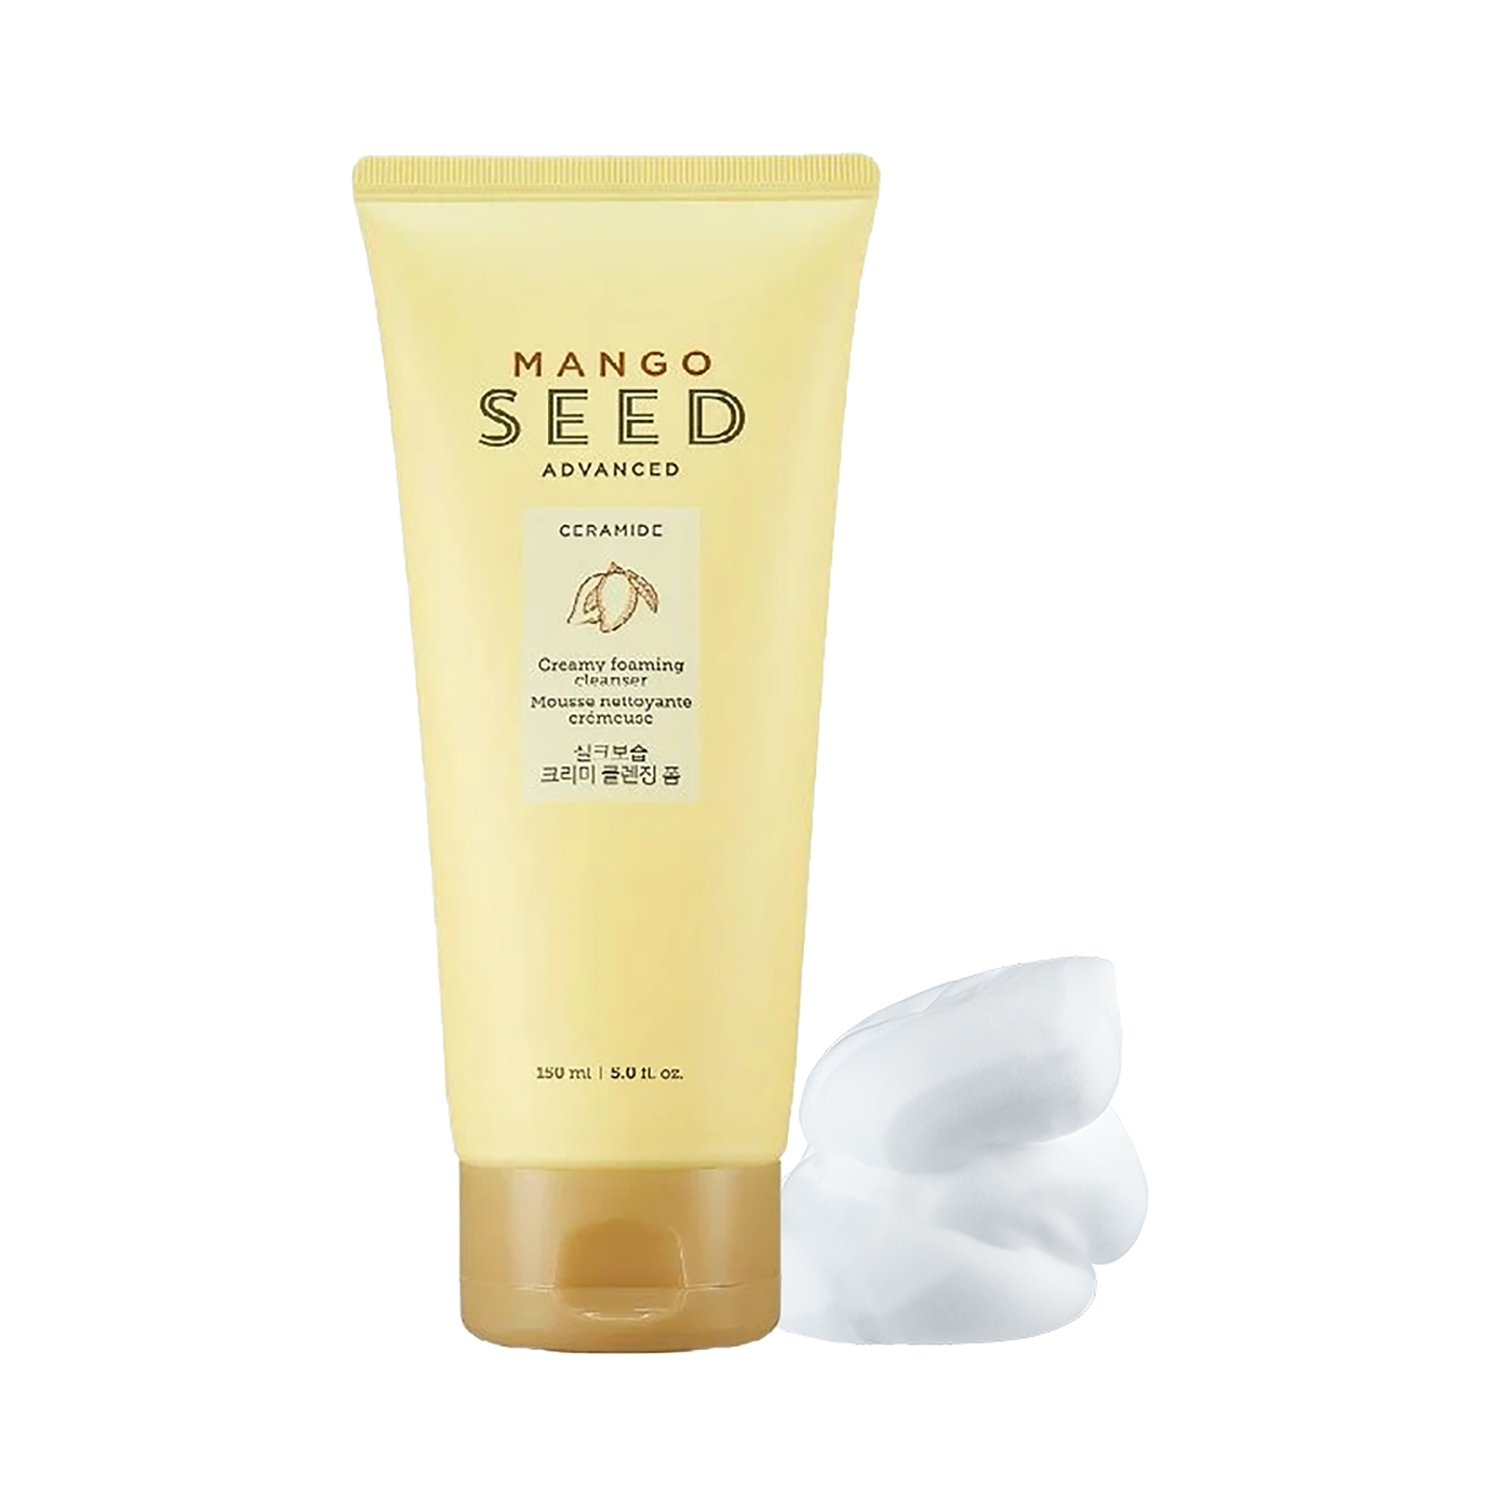 The Face Shop | The Face Shop Mango Seed Creamy Foaming Cleanser (150ml)